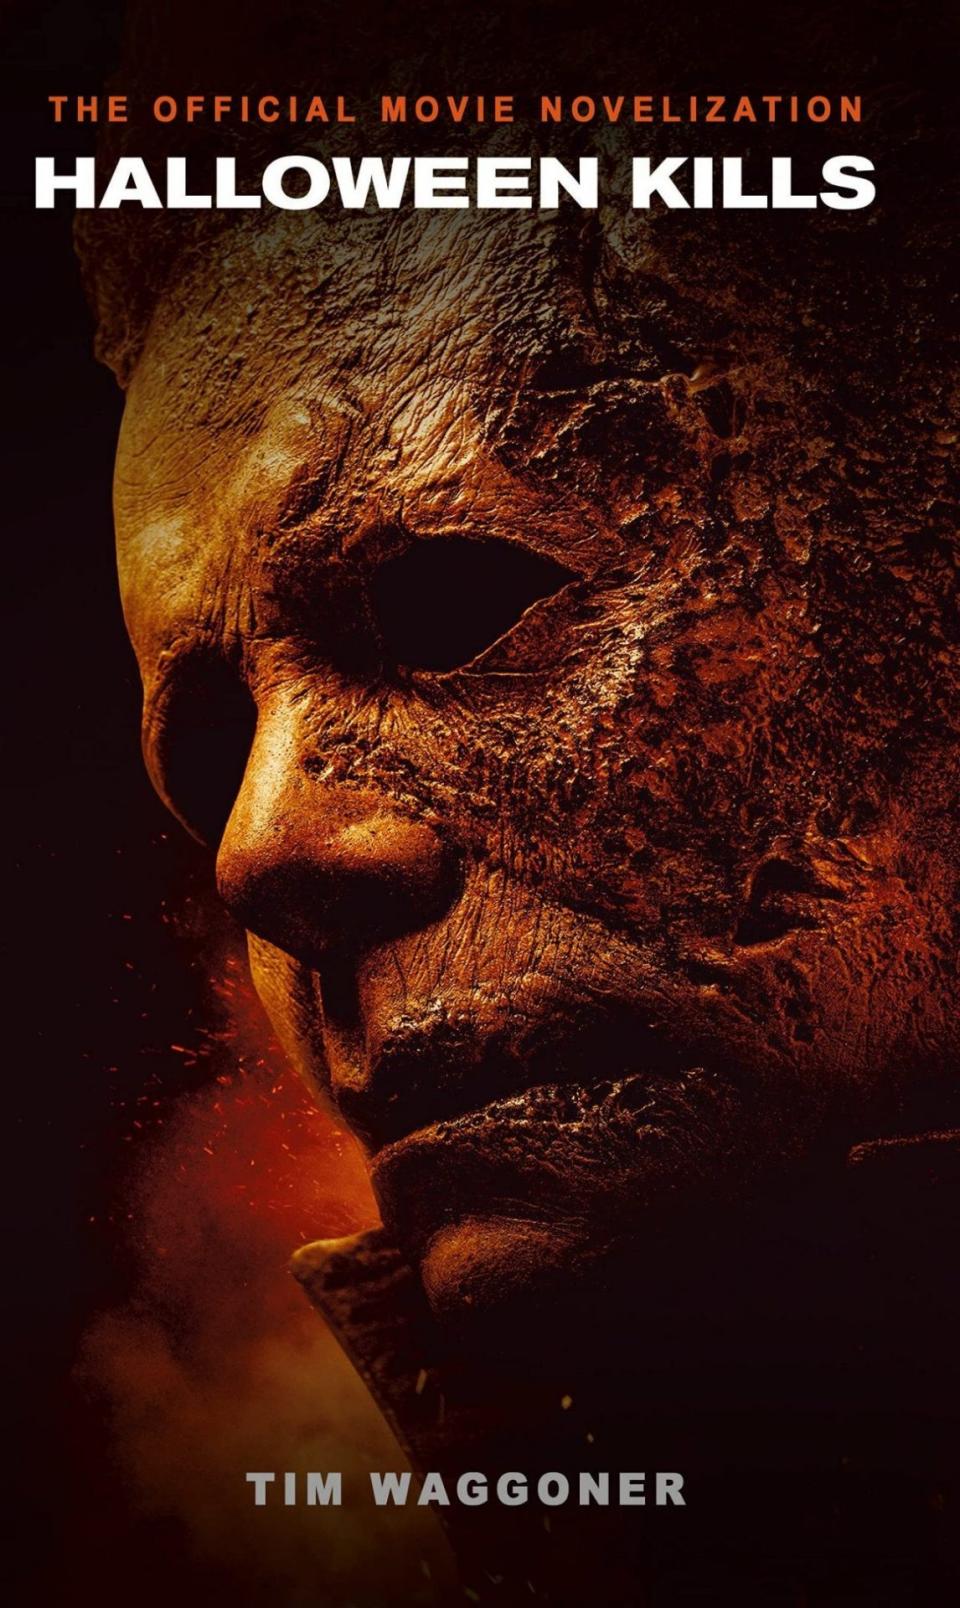 Halloween Kills official novel cover featuring Michael Myers with half burned mask in a orangish red tint